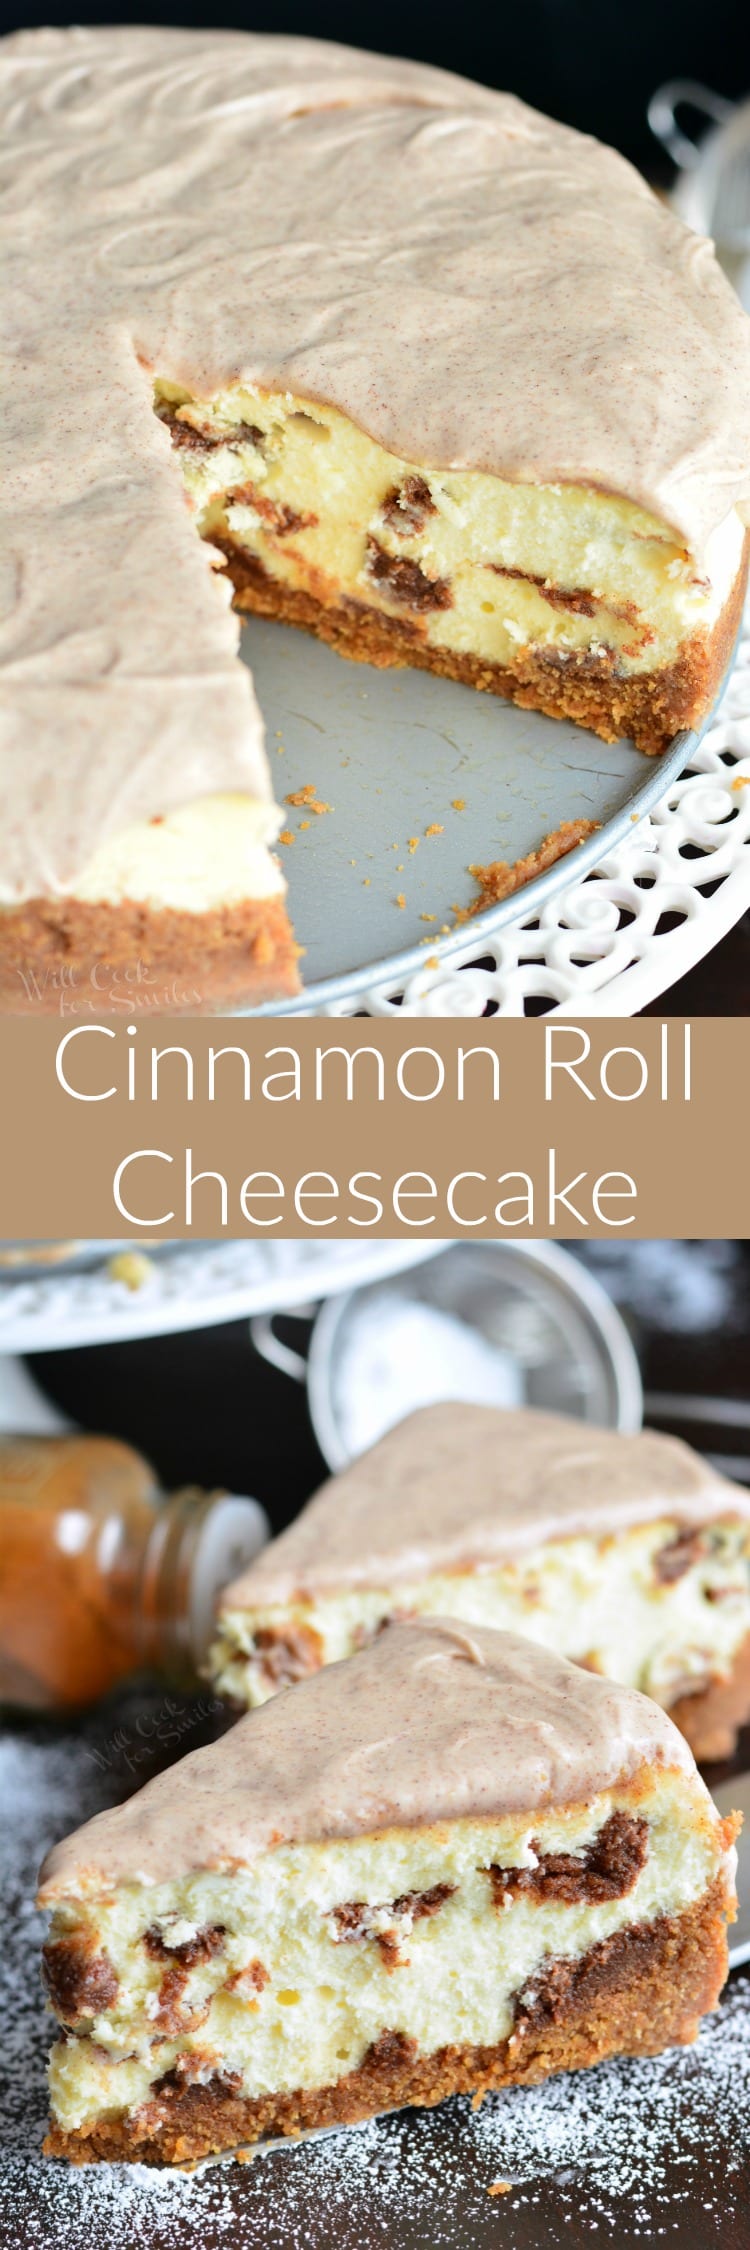 Cinnamon Roll Cheesecake collage 